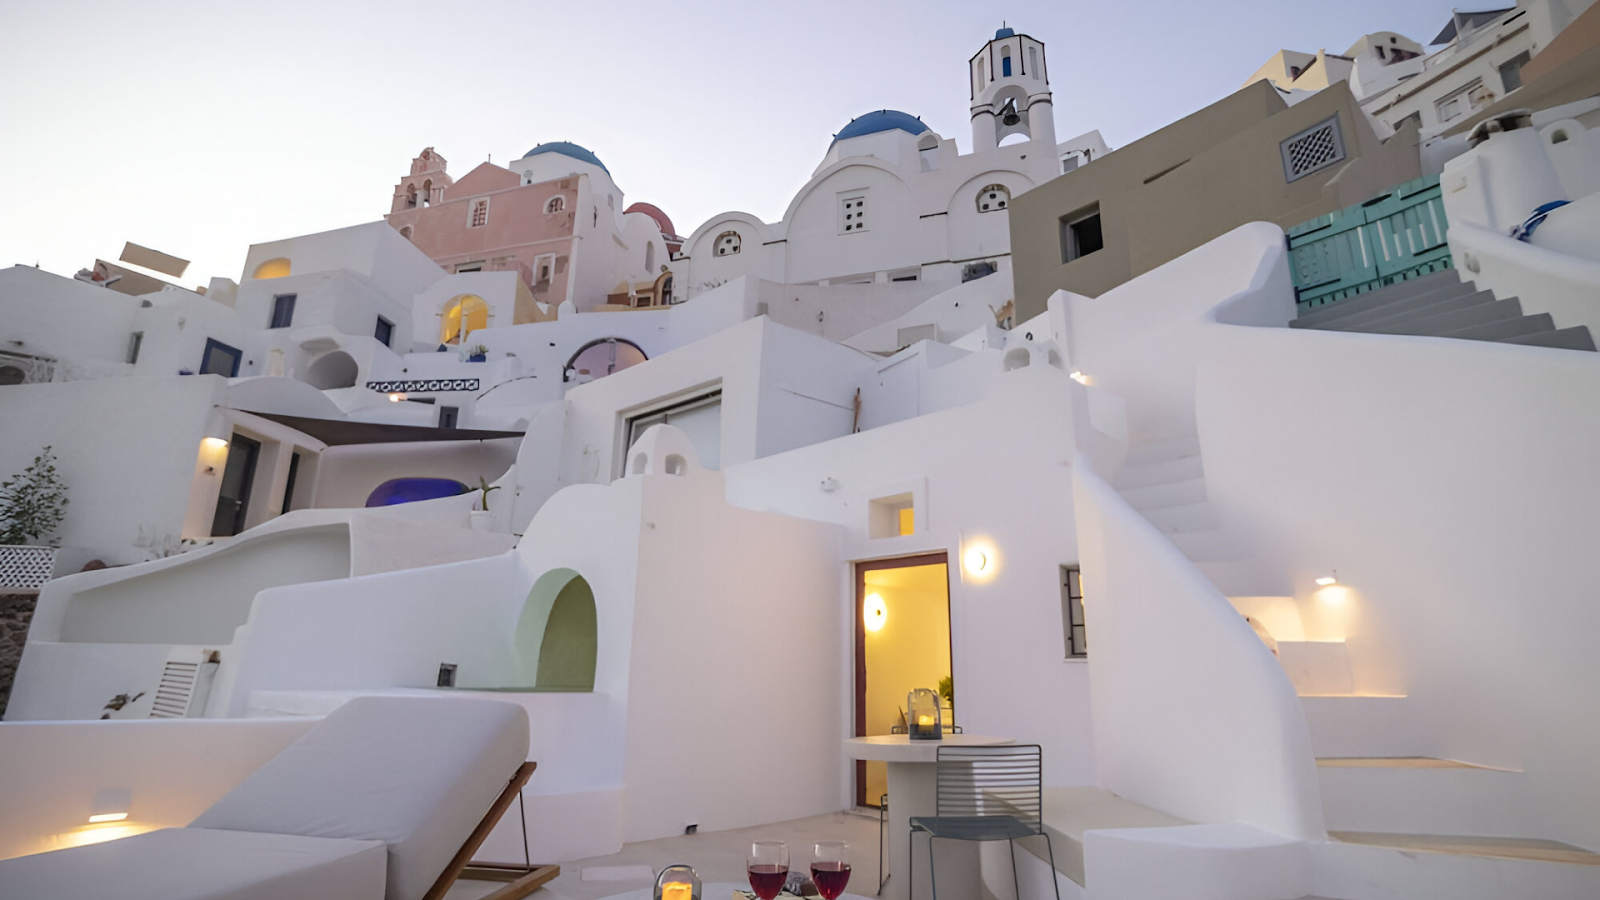 A low-angle shot of the white-washed houses in Santorini. 